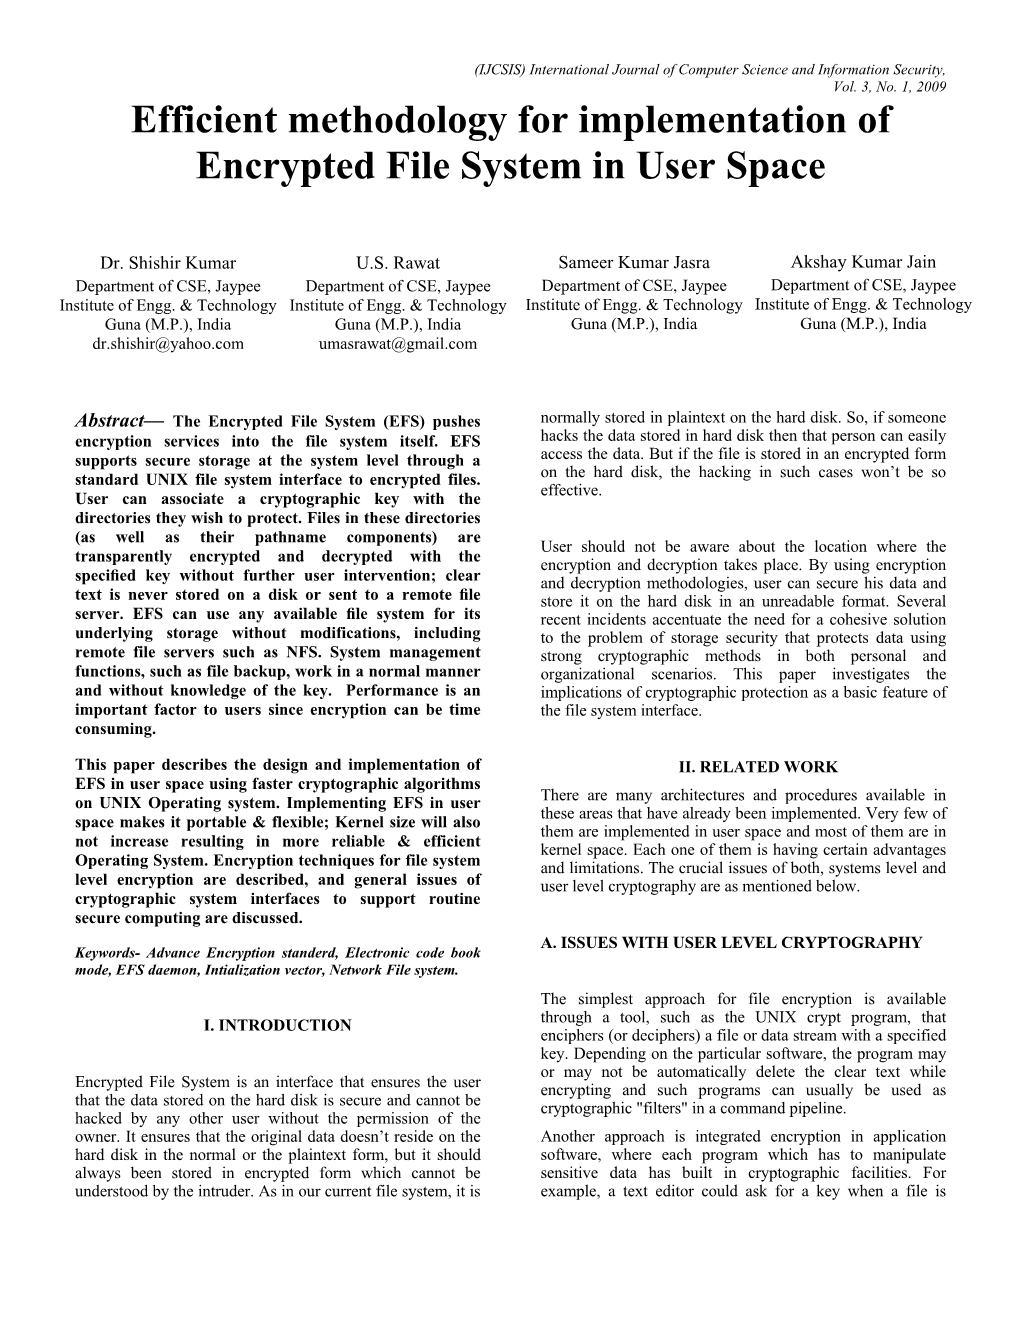 Efficient Methodology for Implementation of Encrypted File System in User Space